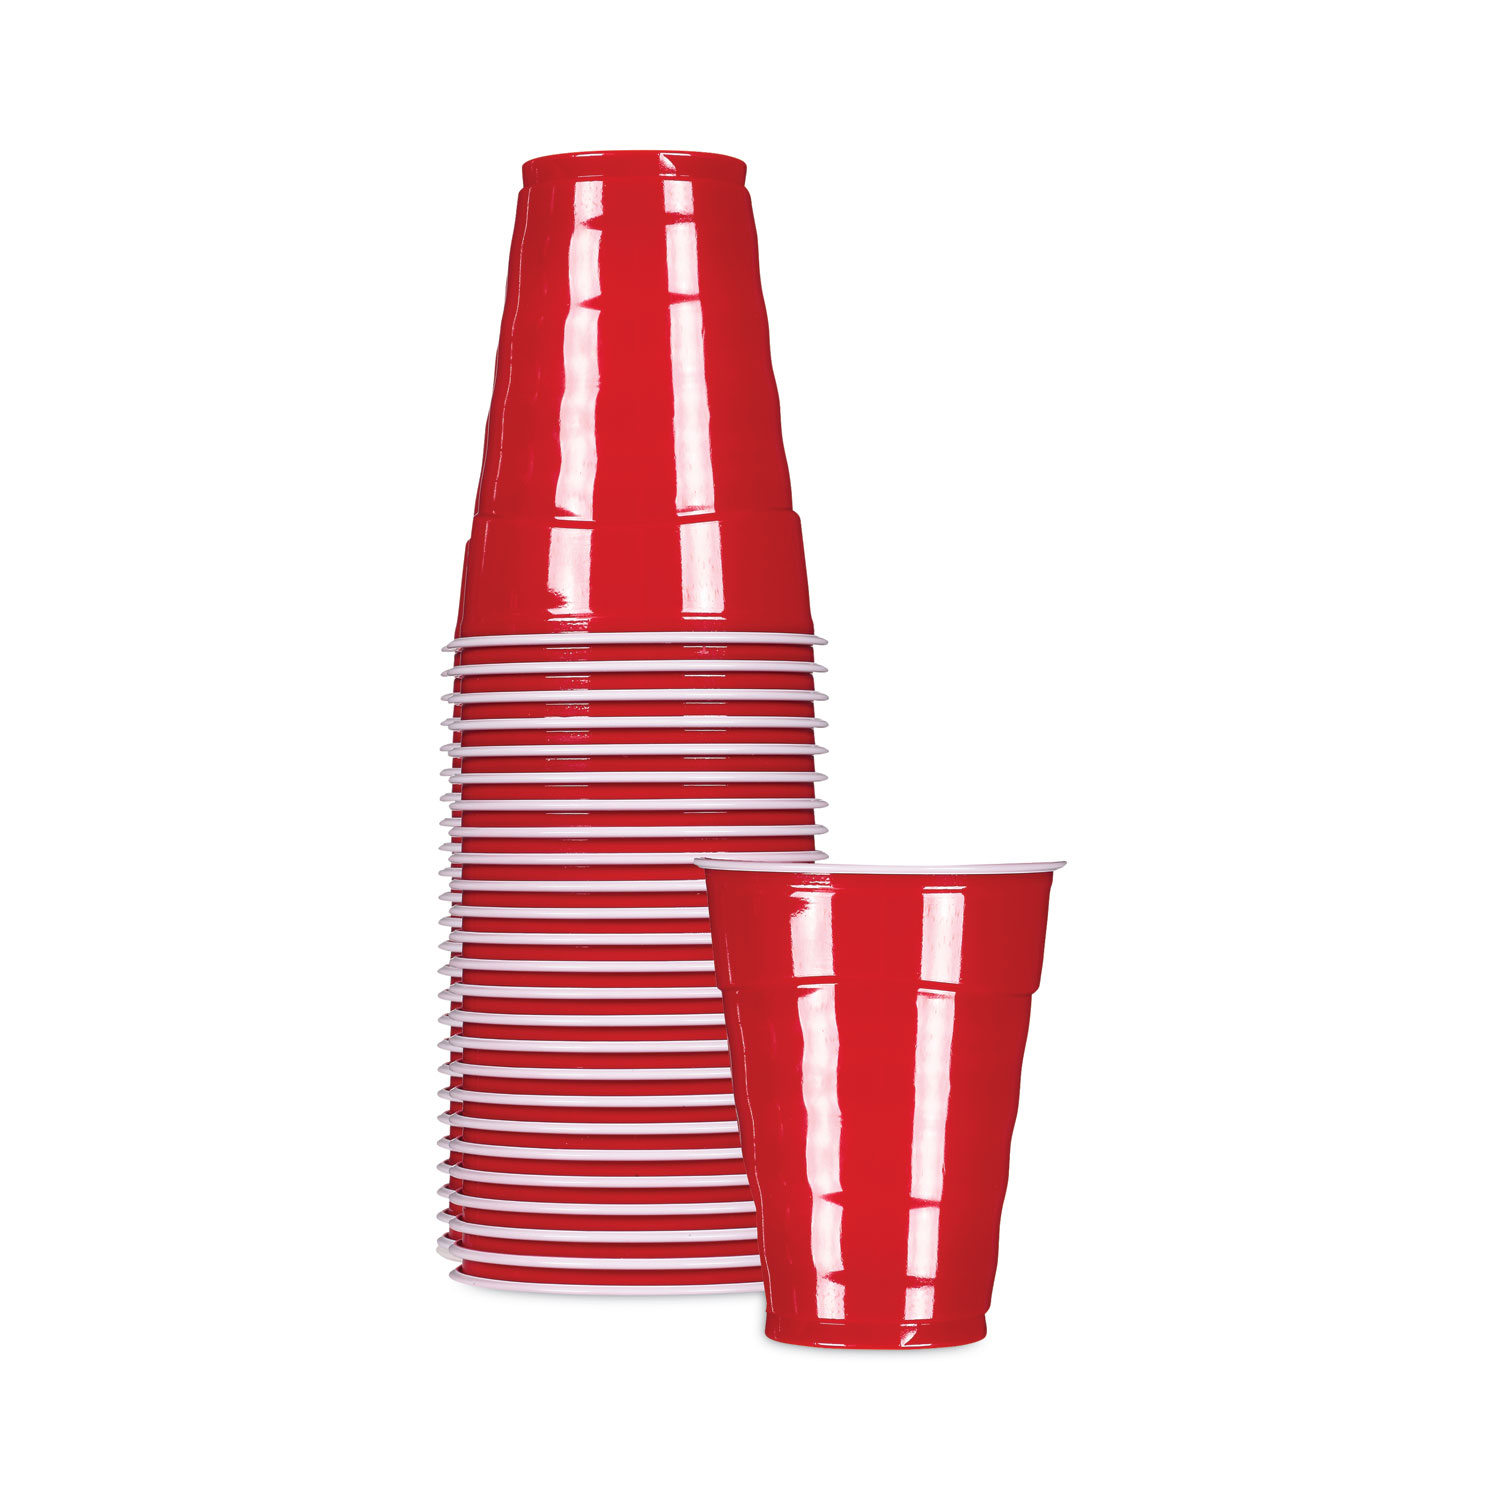 SOLO Red Cold Plastic Party Cups 16 Ounce 50 Pack